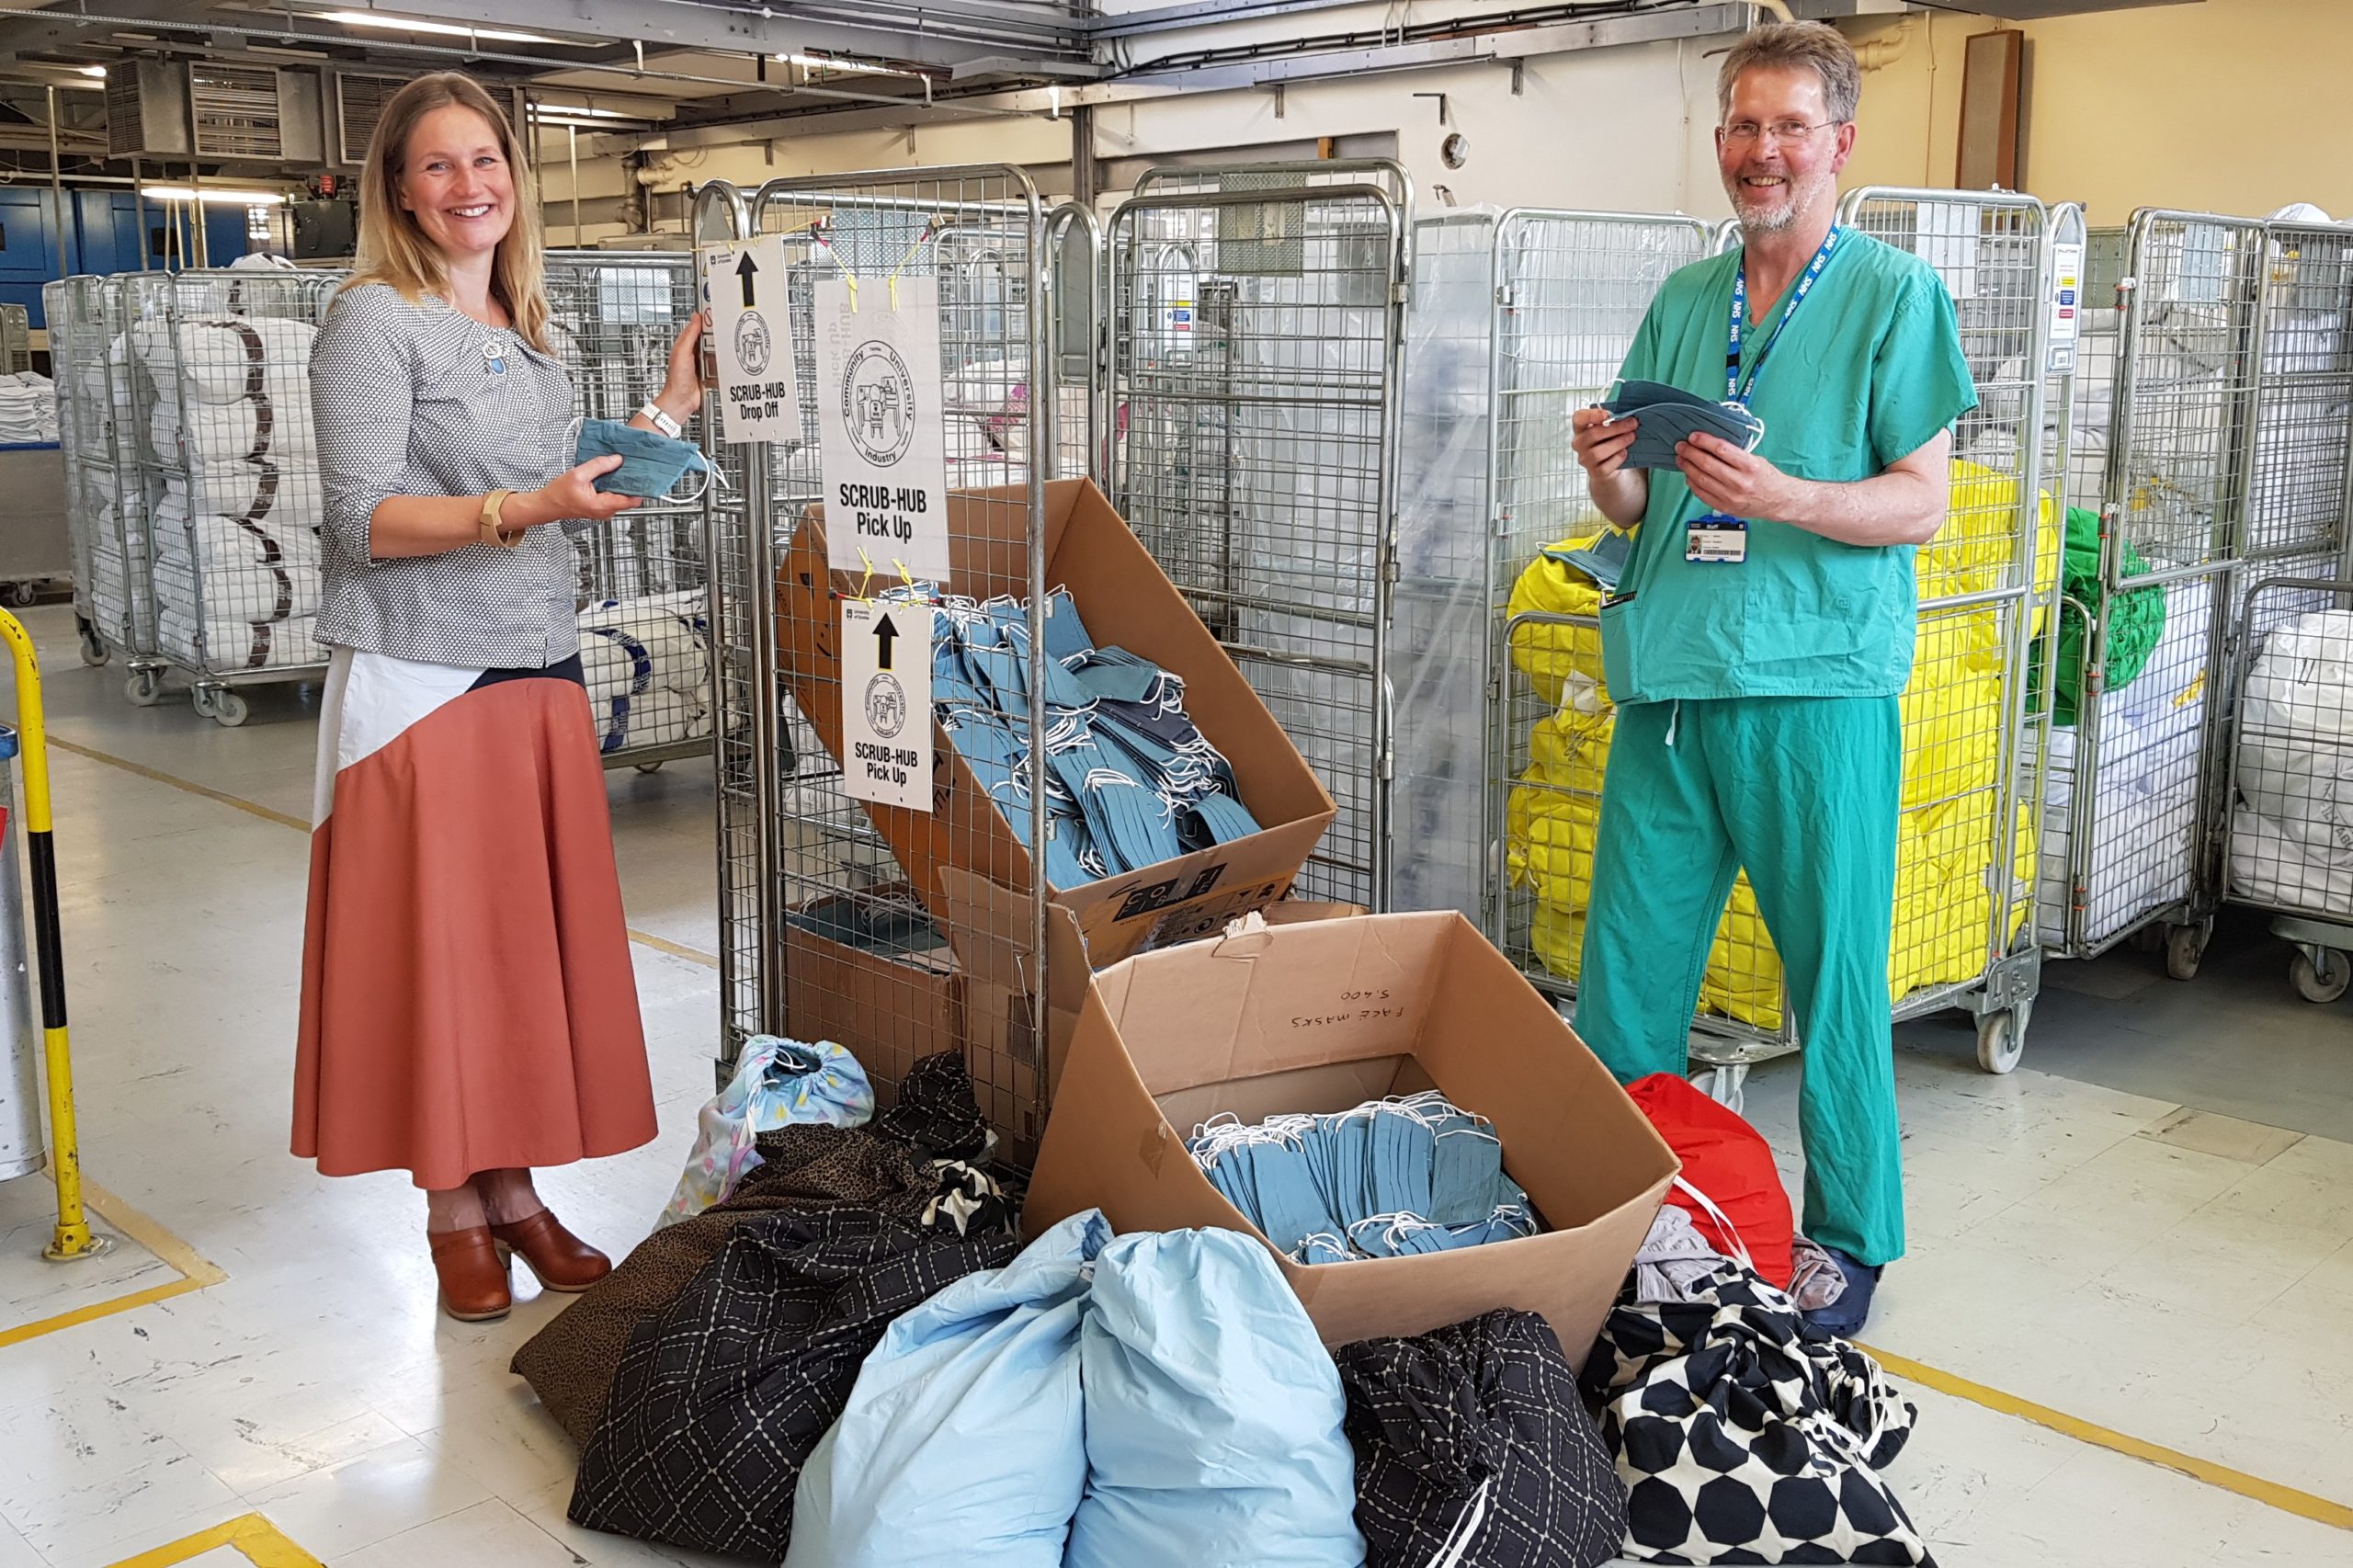 Consultant surgeon Rodney Mountain received the face coverings from Jane Keith of Duncan of Jordanstone College of Art and Design Textiles Department